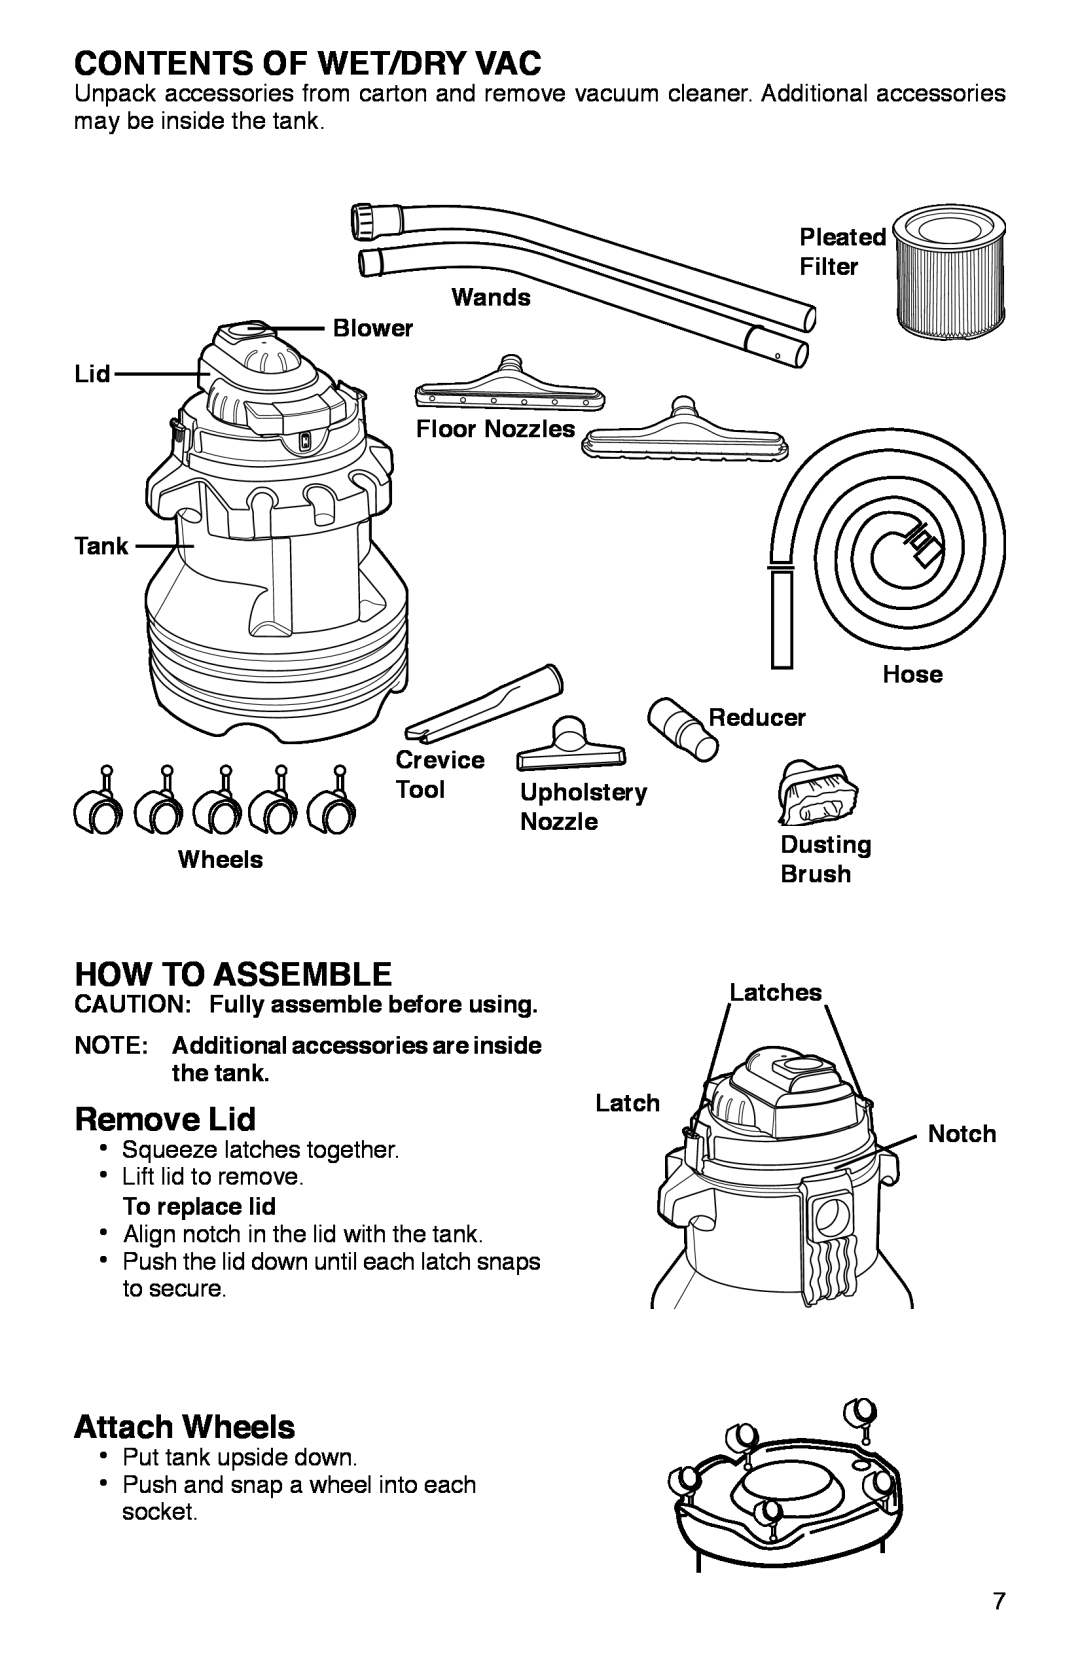 Sanitaire SC2800 warranty Contents Of Wet/Dry Vac, How To Assemble, Remove Lid, Attach Wheels 